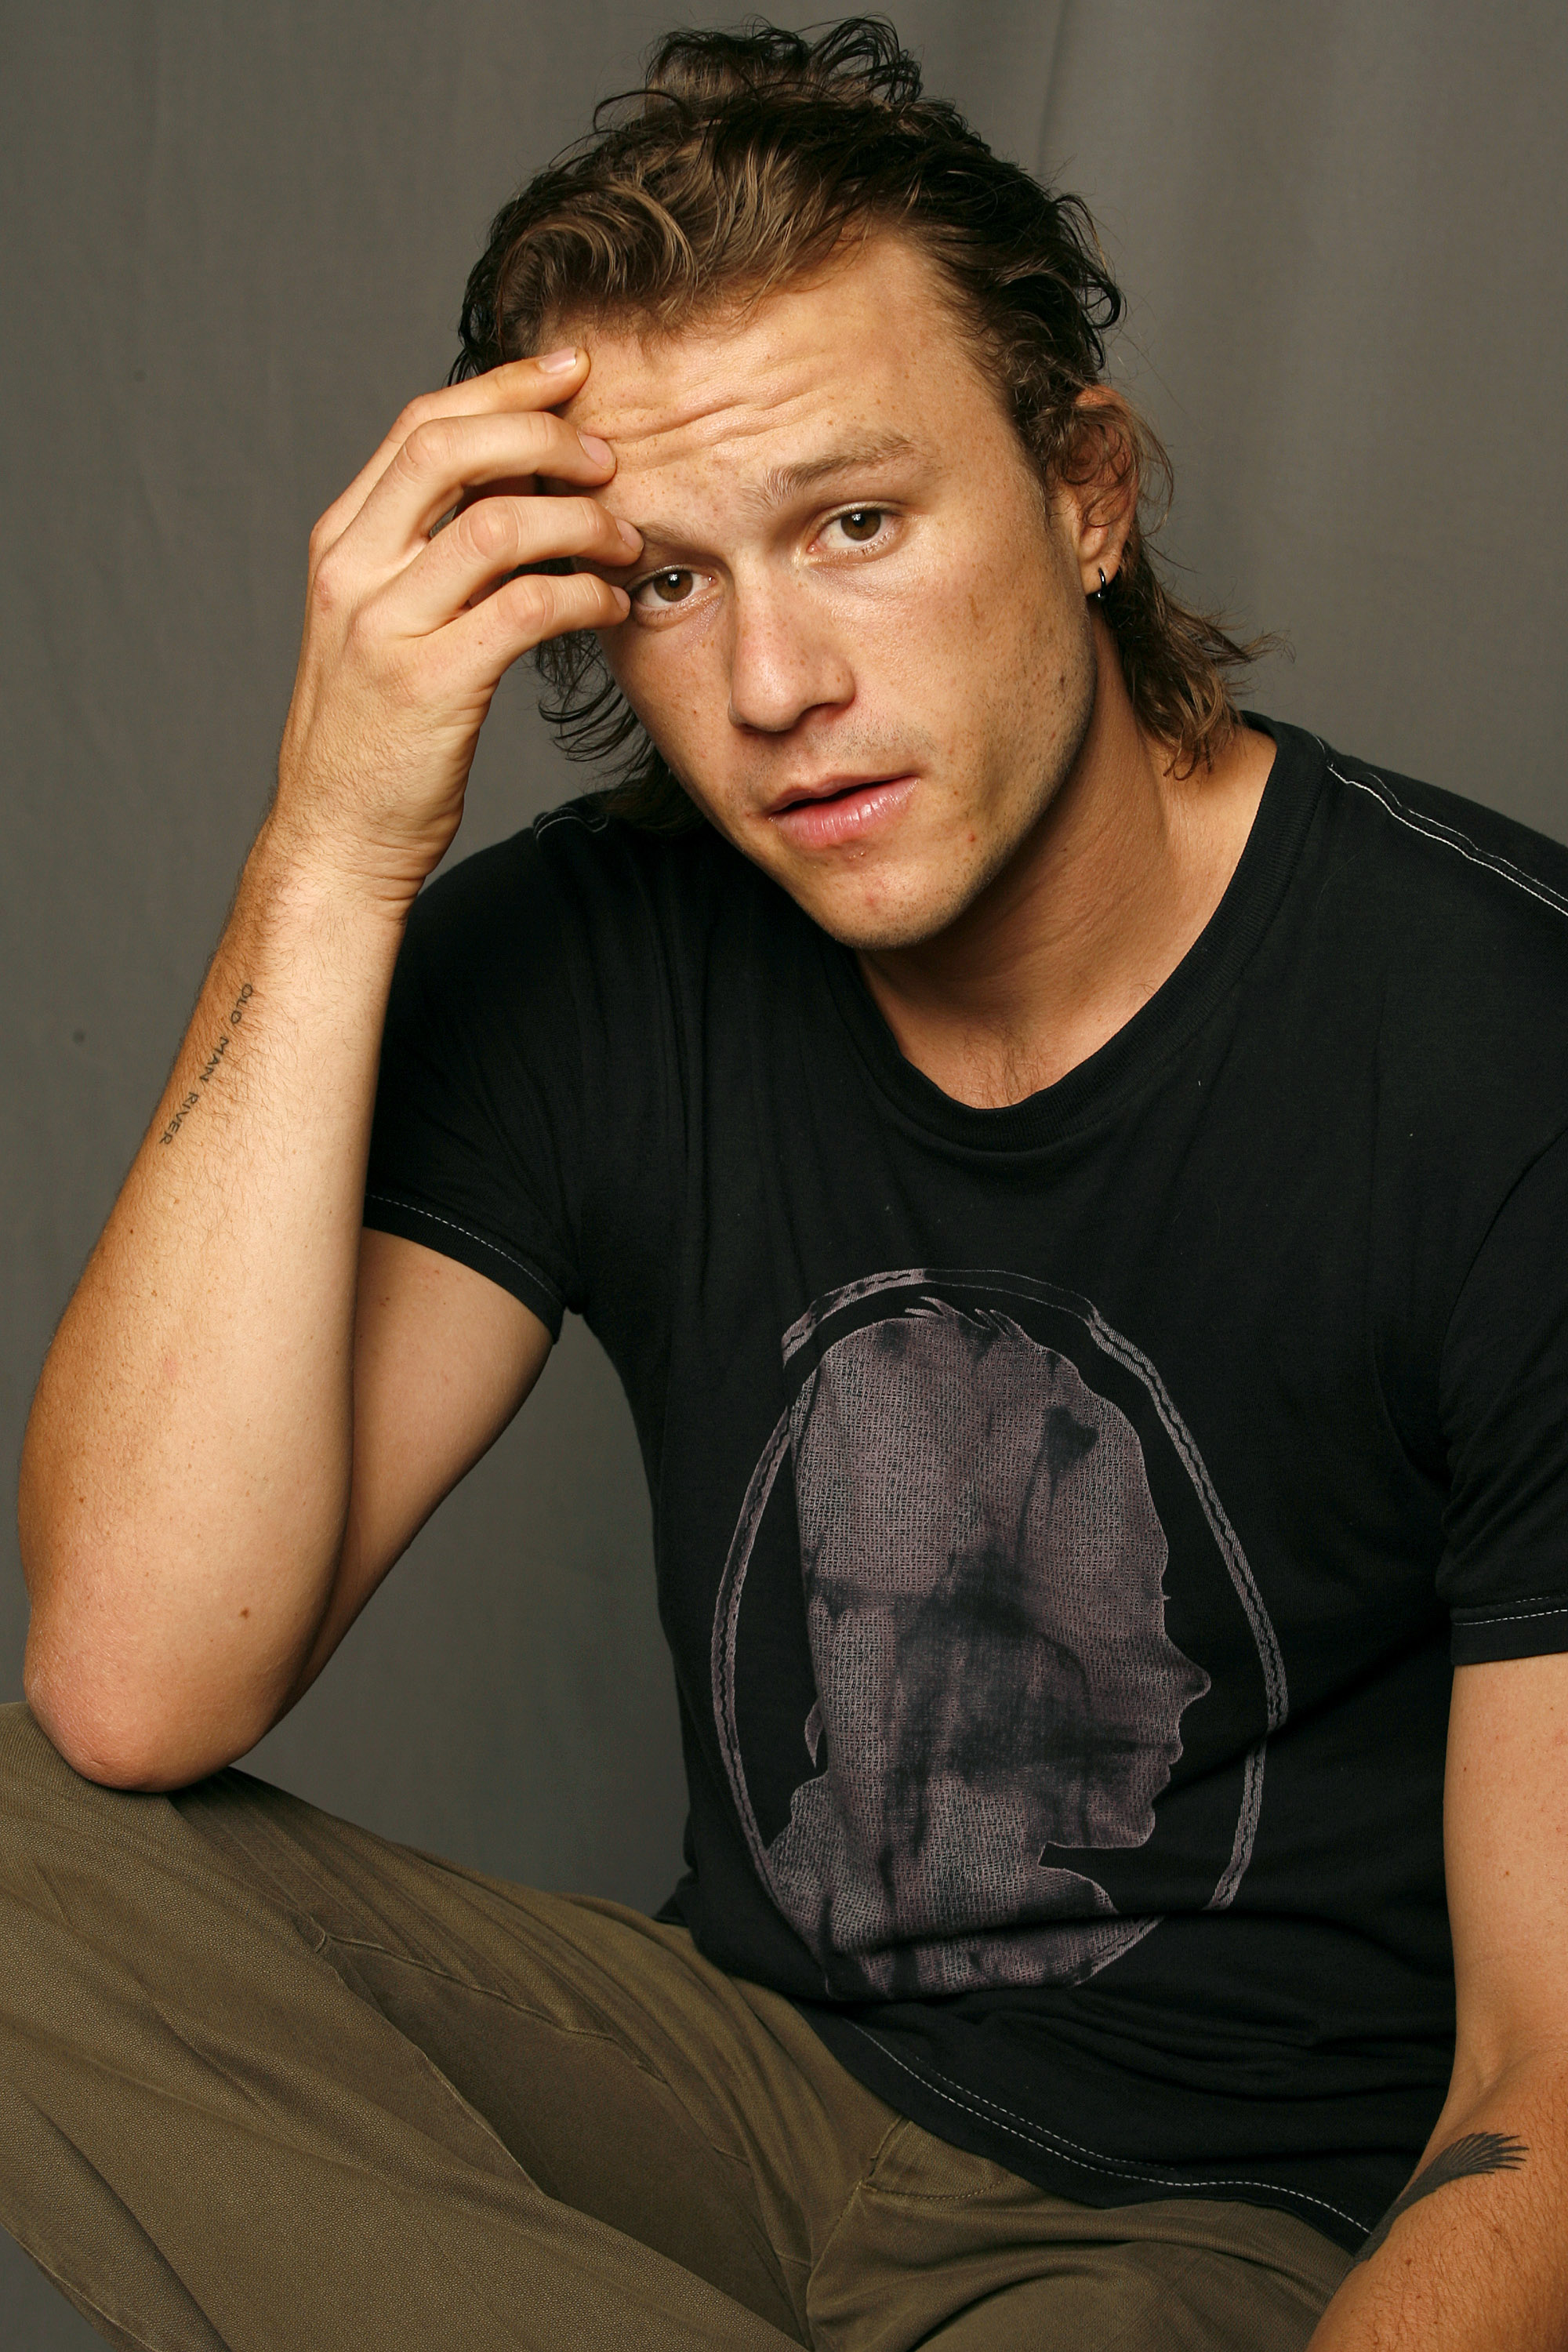 Heath Ledger at the 31st Annual Toronto International Film Festival | Source: Getty Images